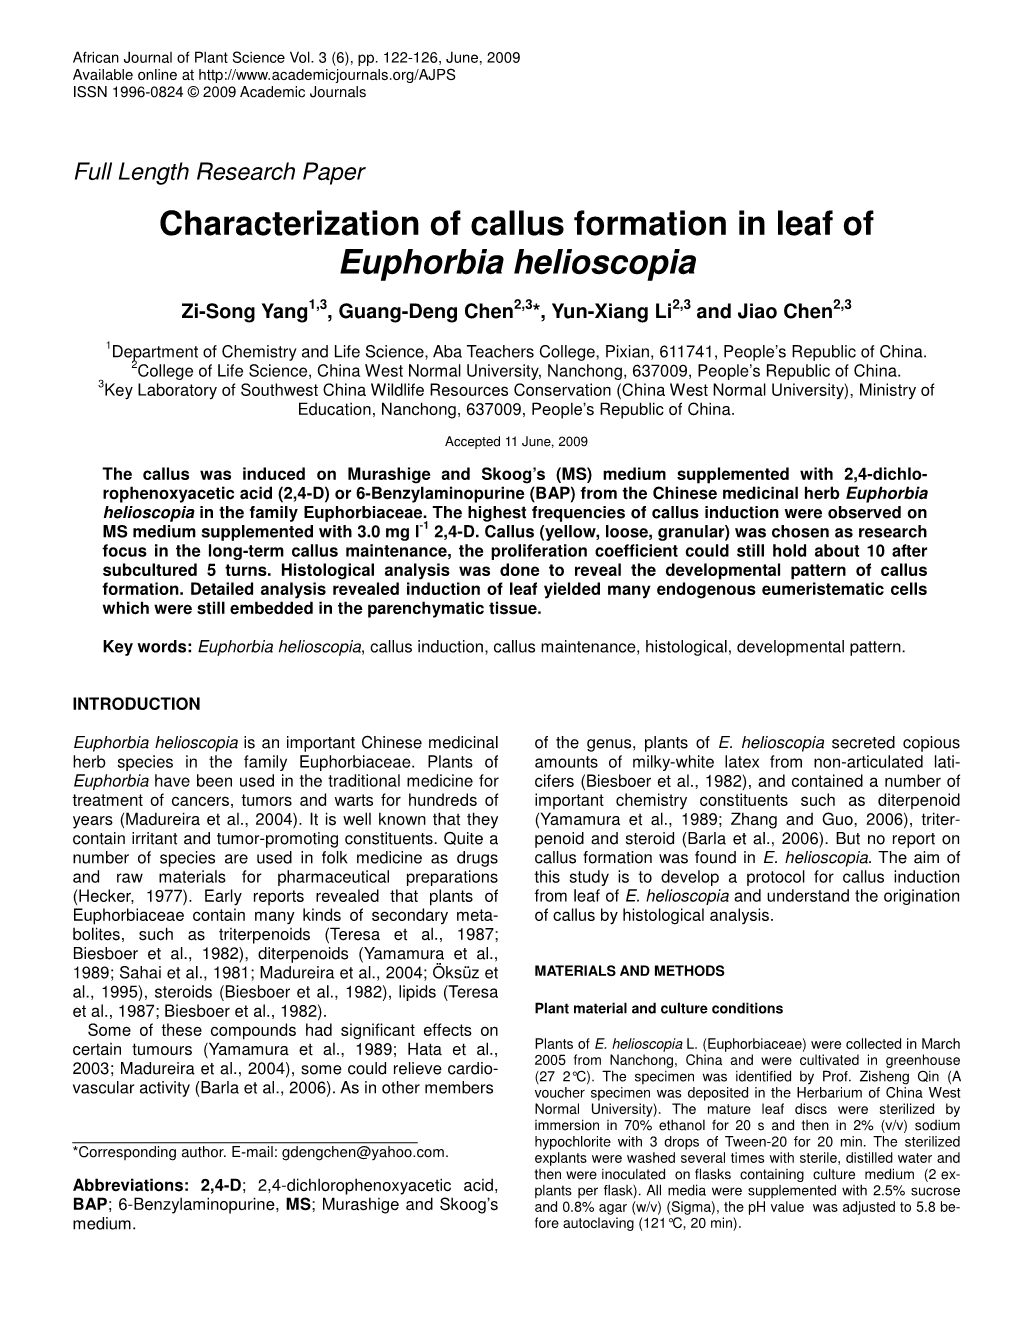 Characterization of Callus Formation in Leaf of Euphorbia Helioscopia